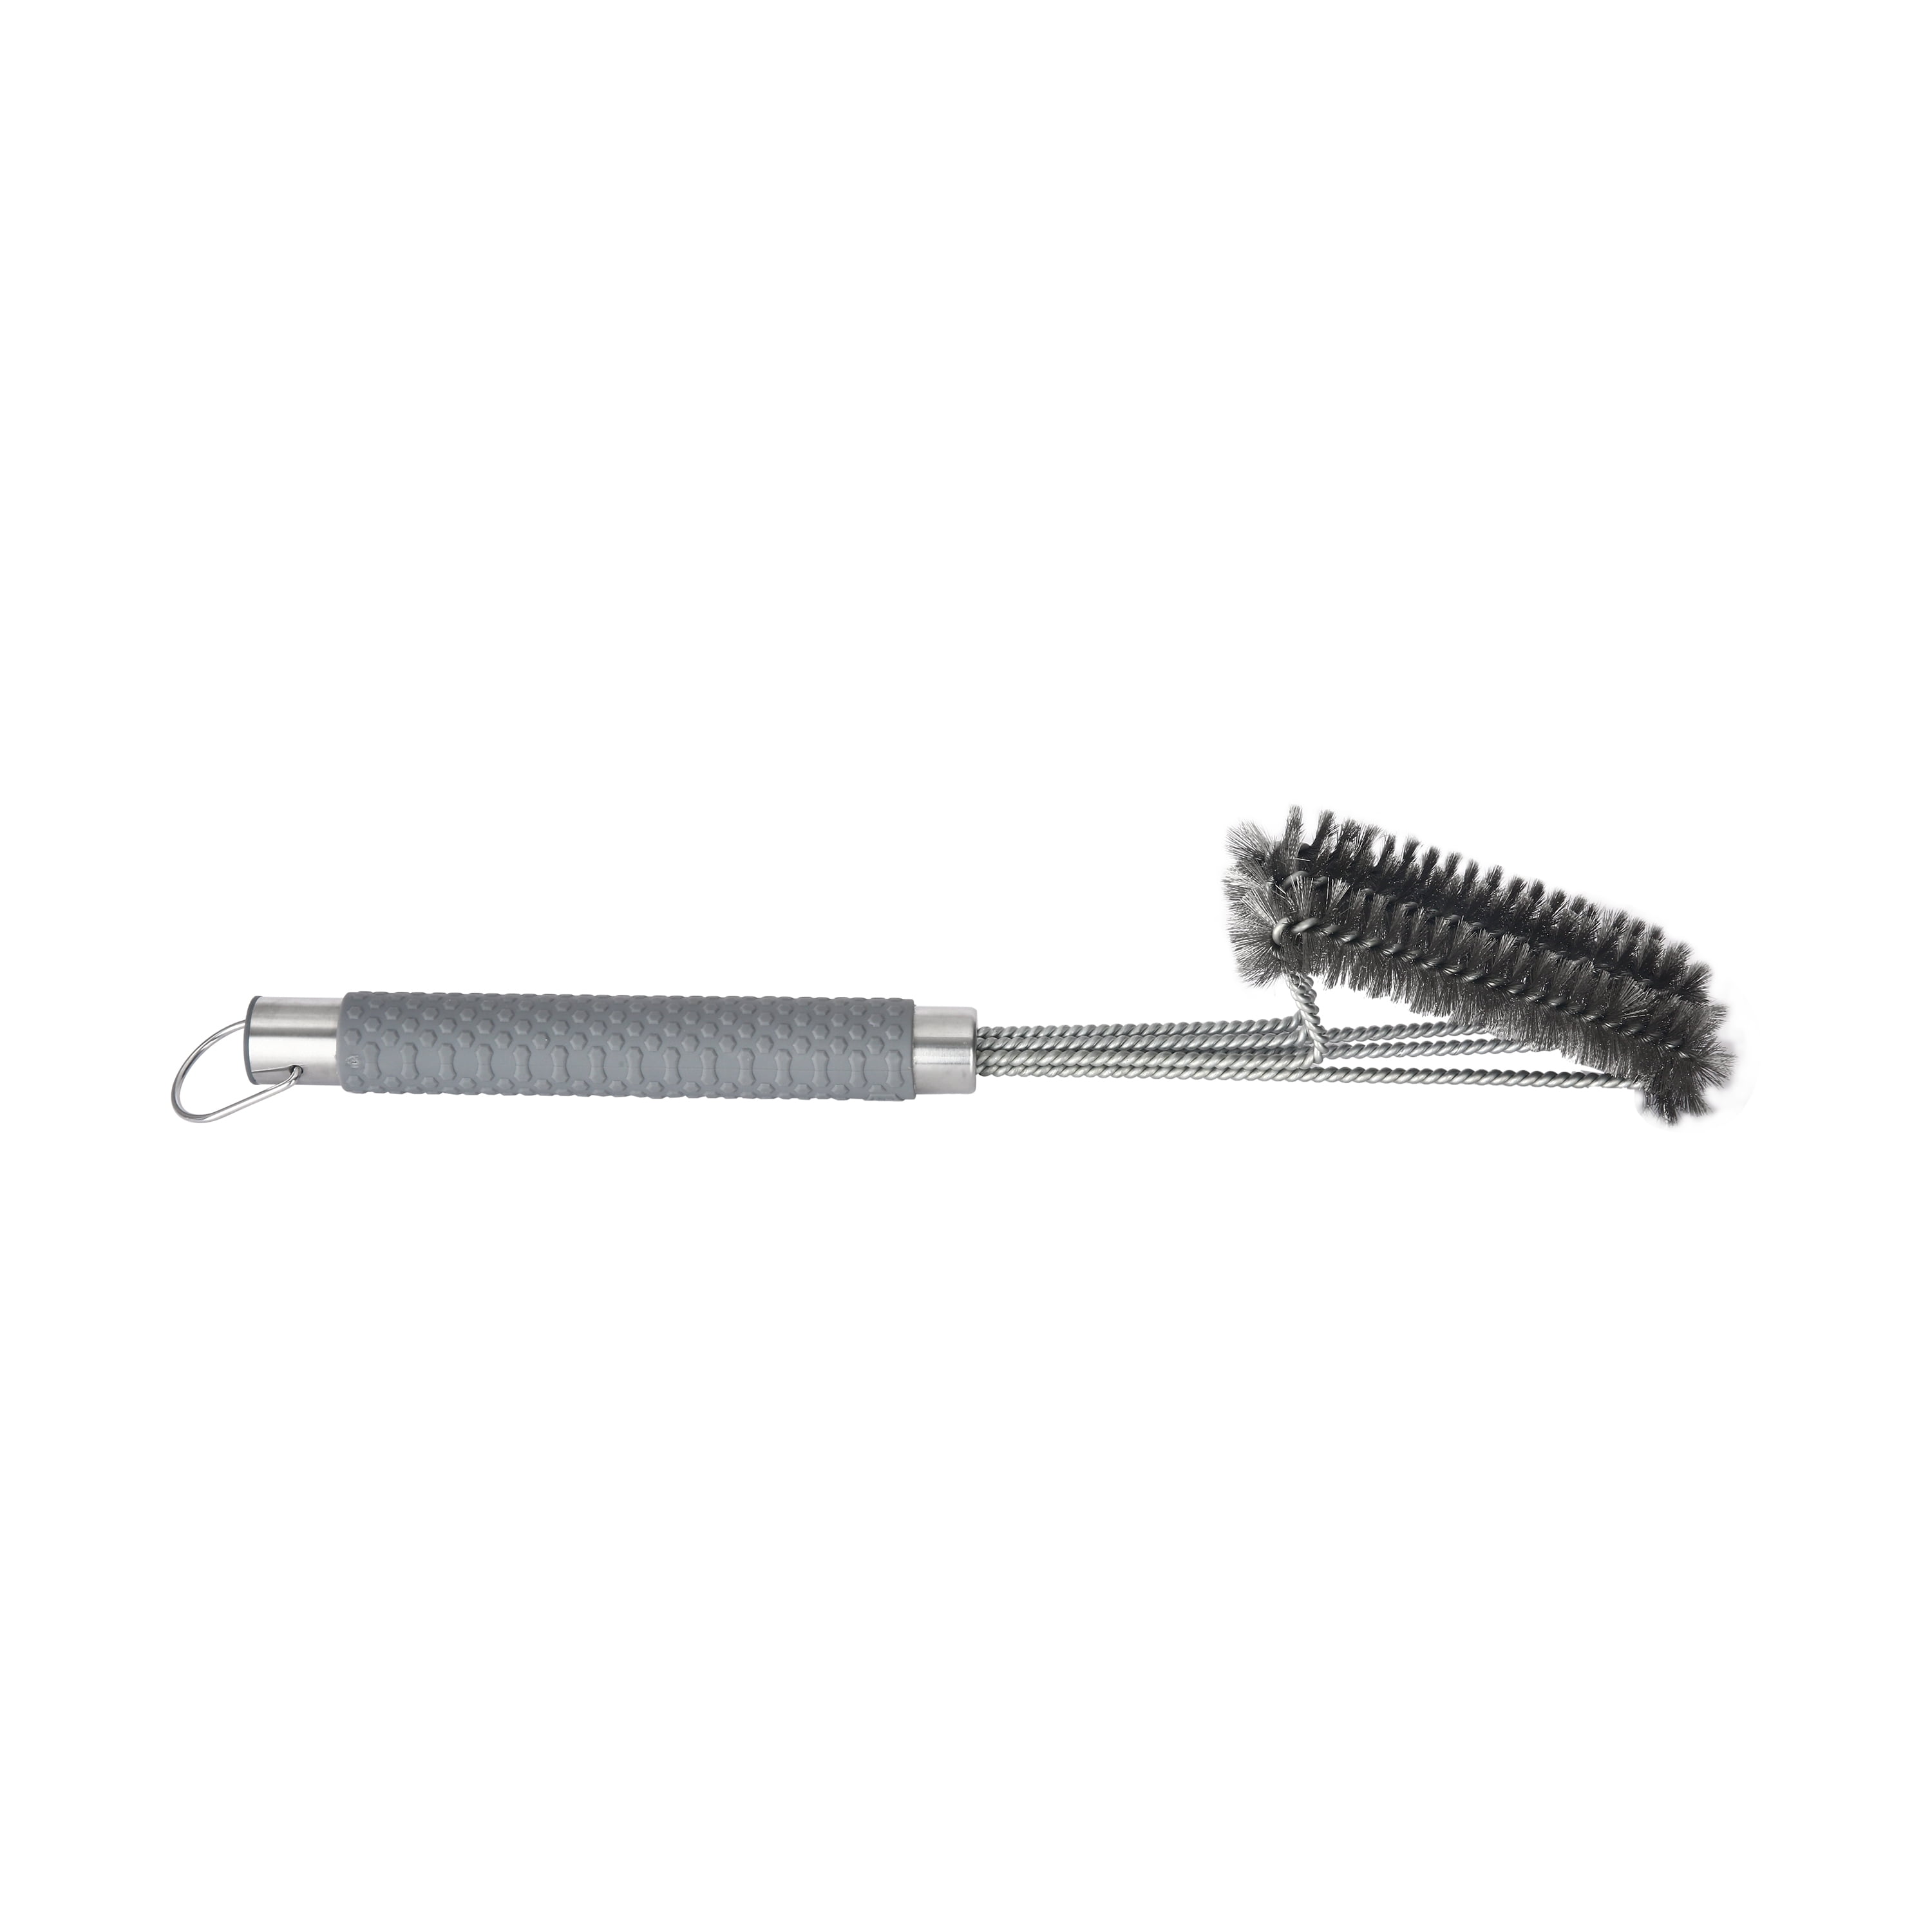 SIMPLETASTE Grill Brush and Scraper, Durable & Effective, Include Extra  Stainless Steel Bristles Head for Replacement, Wire Grill Brush for Outdoor